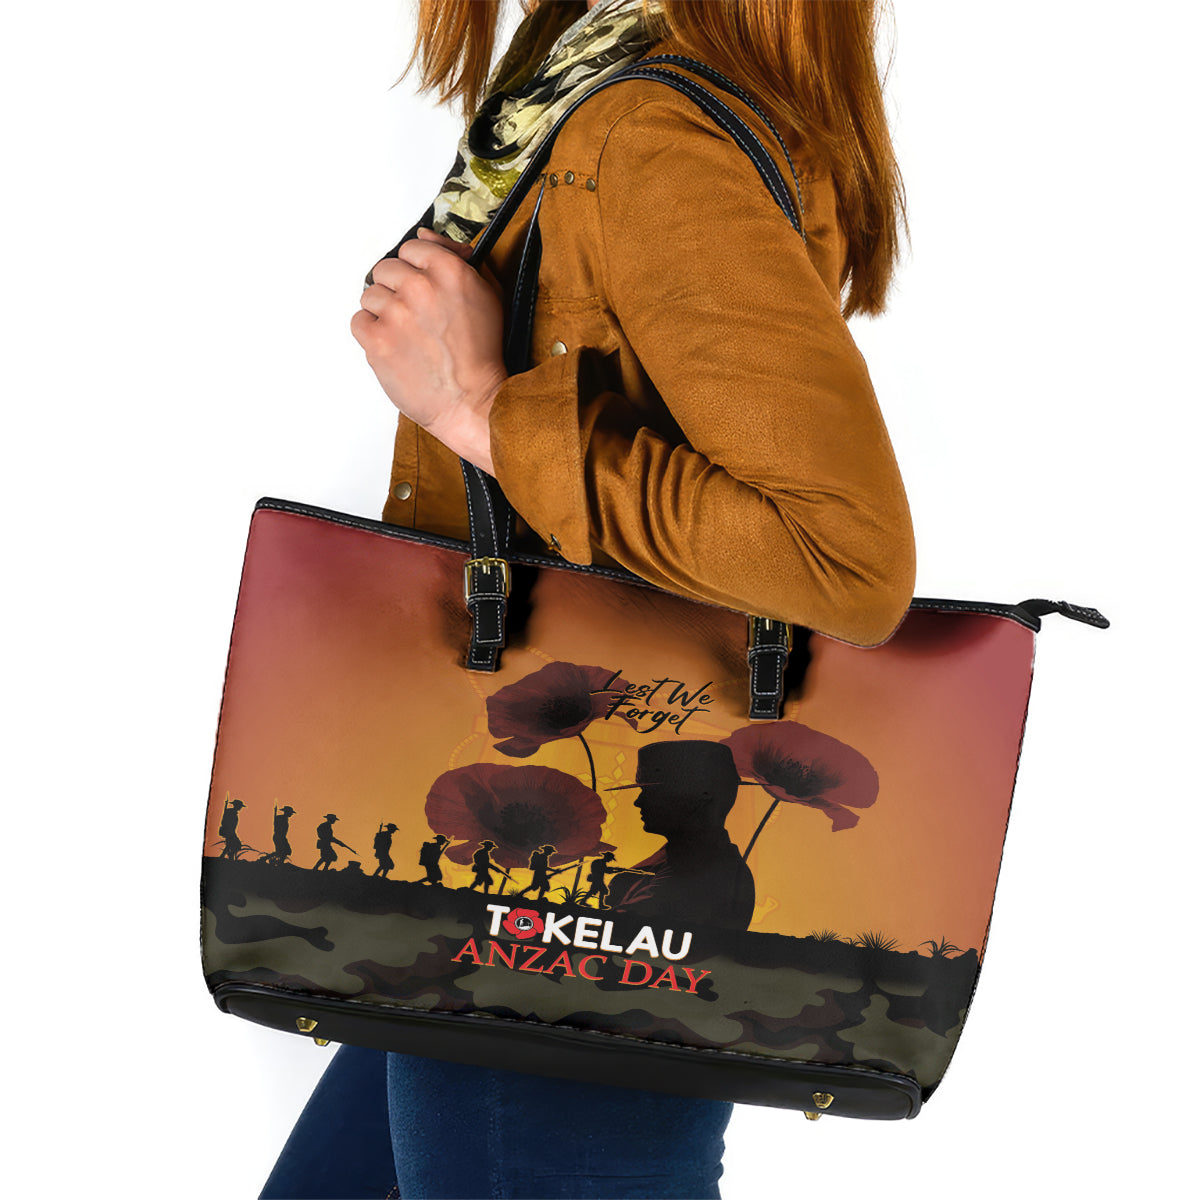 Tokelau ANZAC Day Leather Tote Bag Camouflage With Poppies Lest We Forget LT14 Yellow - Polynesian Pride